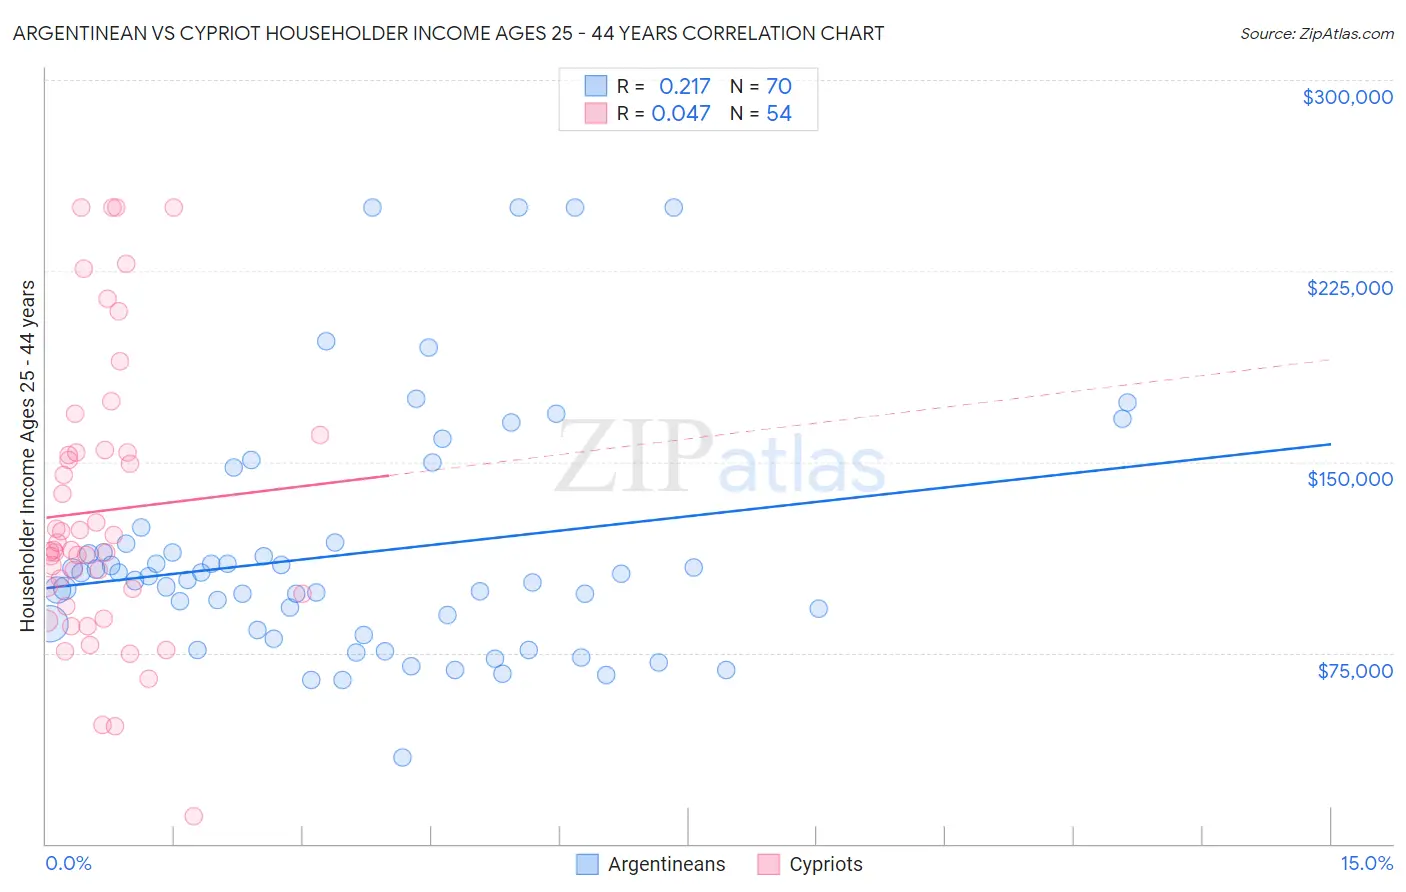 Argentinean vs Cypriot Householder Income Ages 25 - 44 years